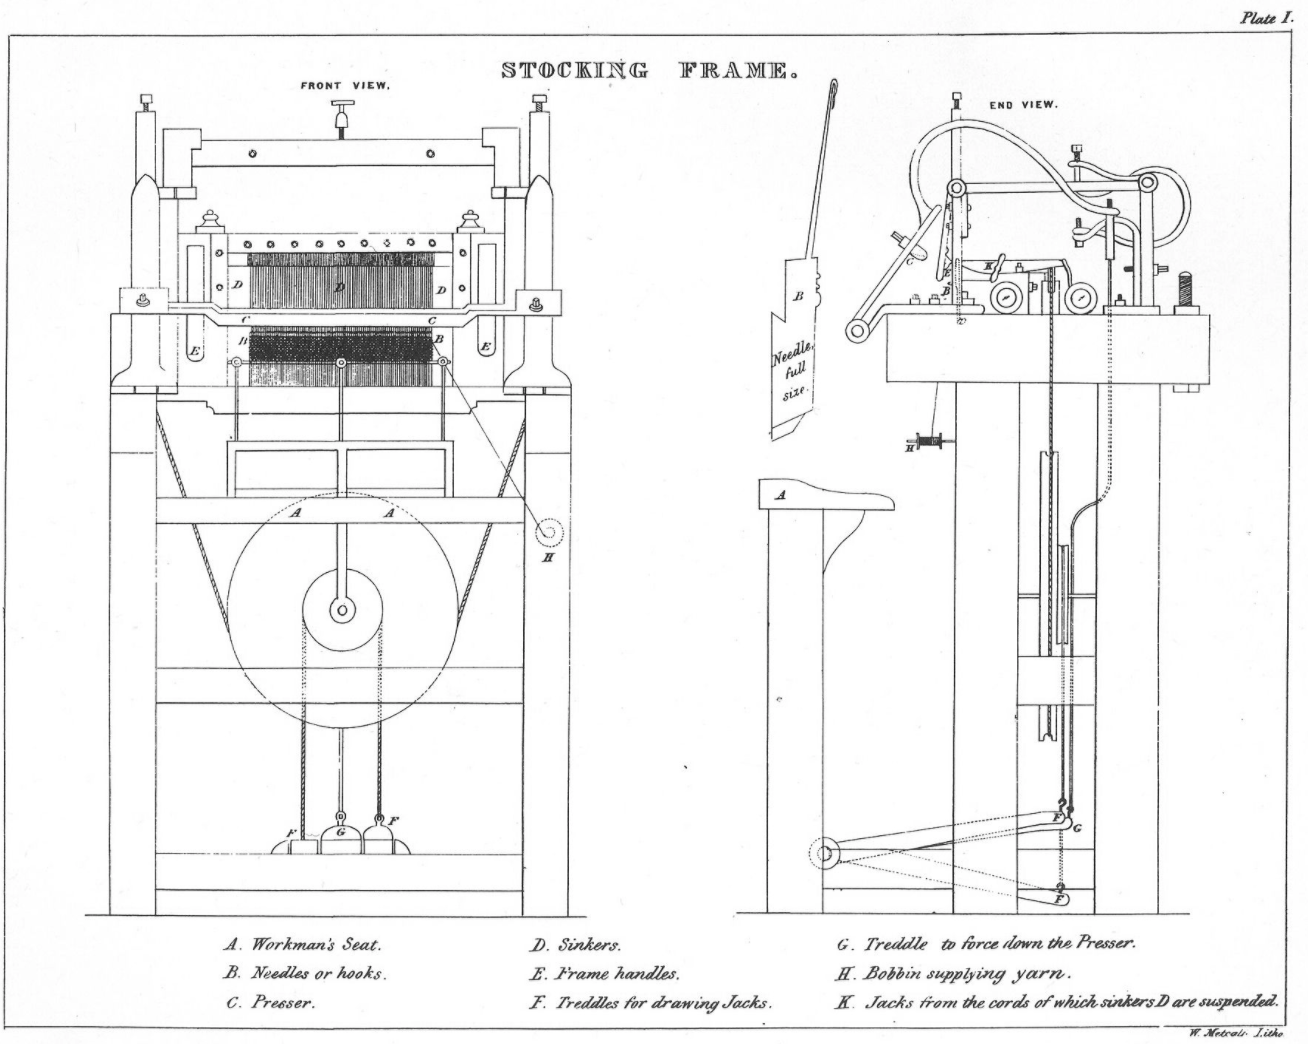 Knitting frame with captions of its various components from Felkin: A history of the machine-wrought hosiery and lace manufacturers (1867)